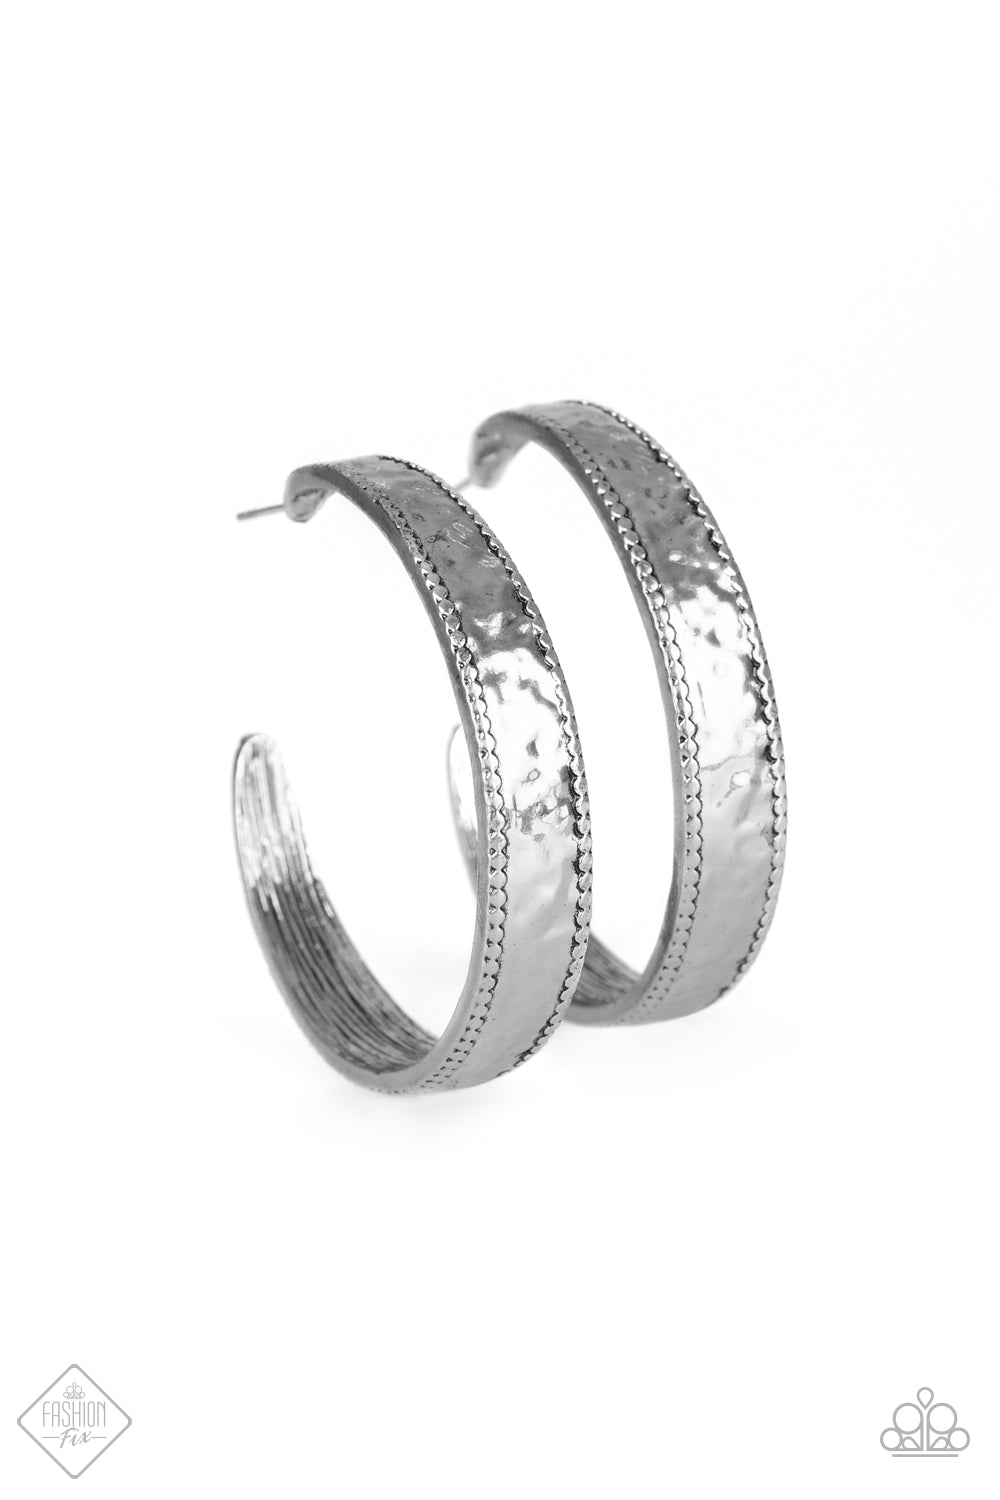 SOUL TRAIN - SILVER HAMMERED TEXTURED FASHION FIX HOOP EARRINGS